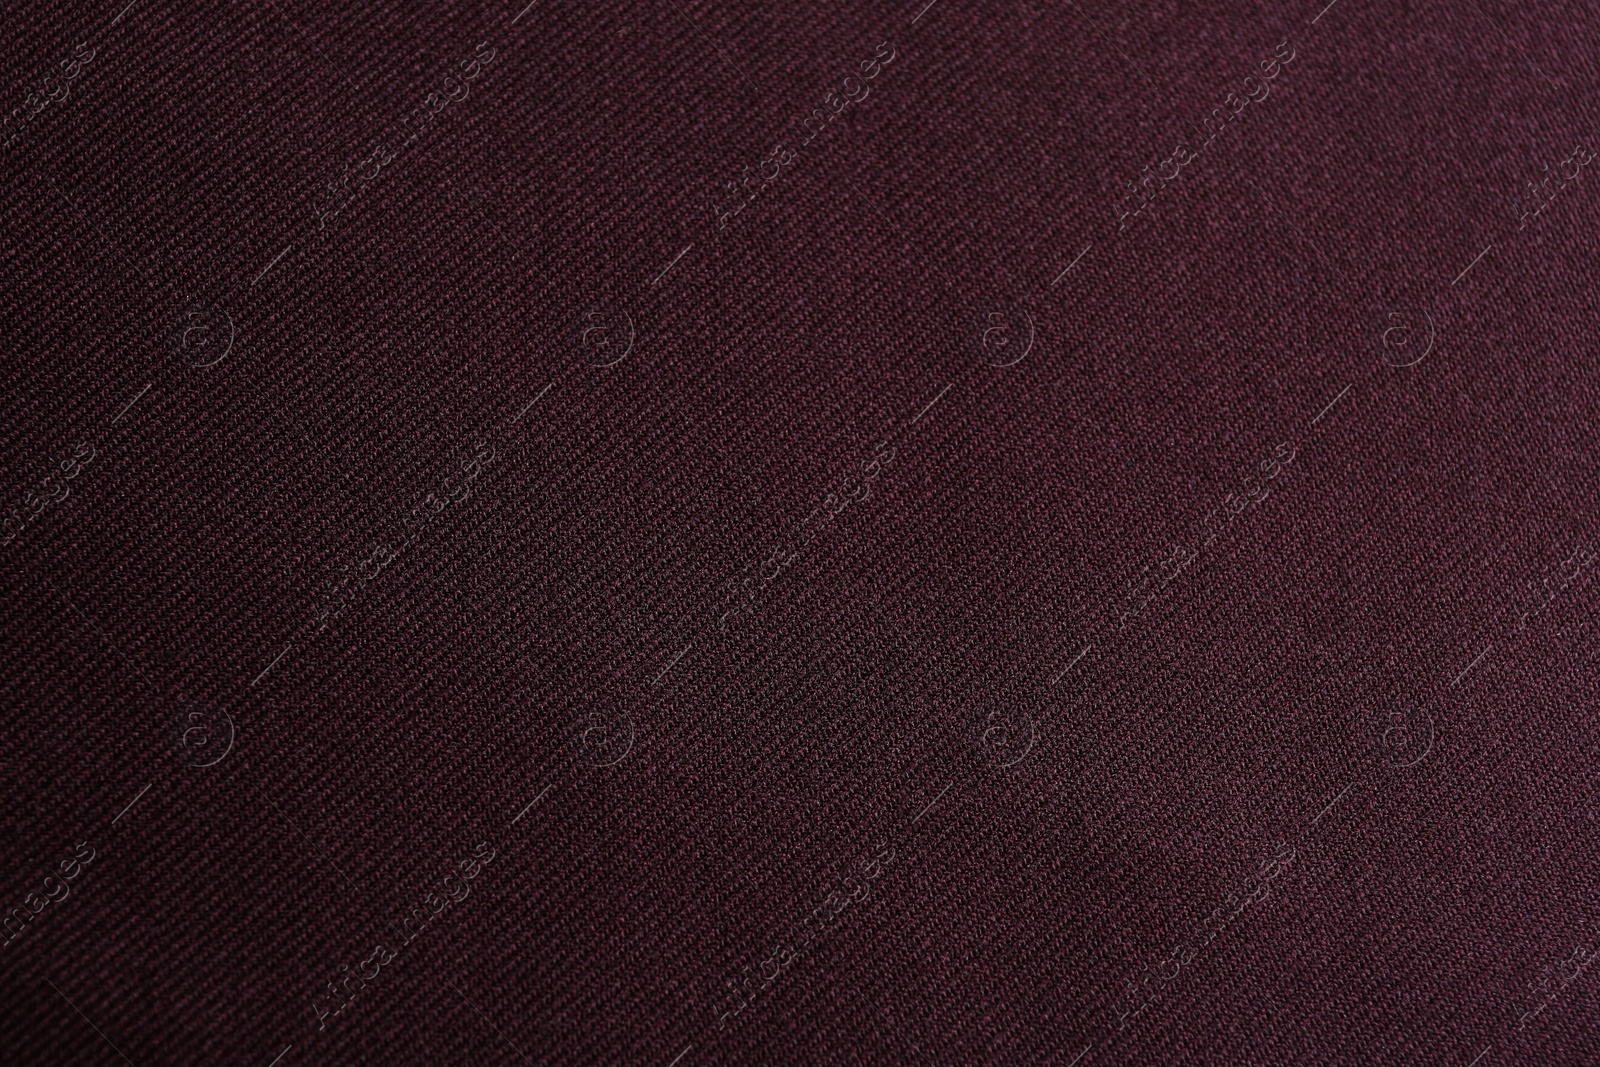 Photo of Texture of beautiful dark red fabric as background, closeup